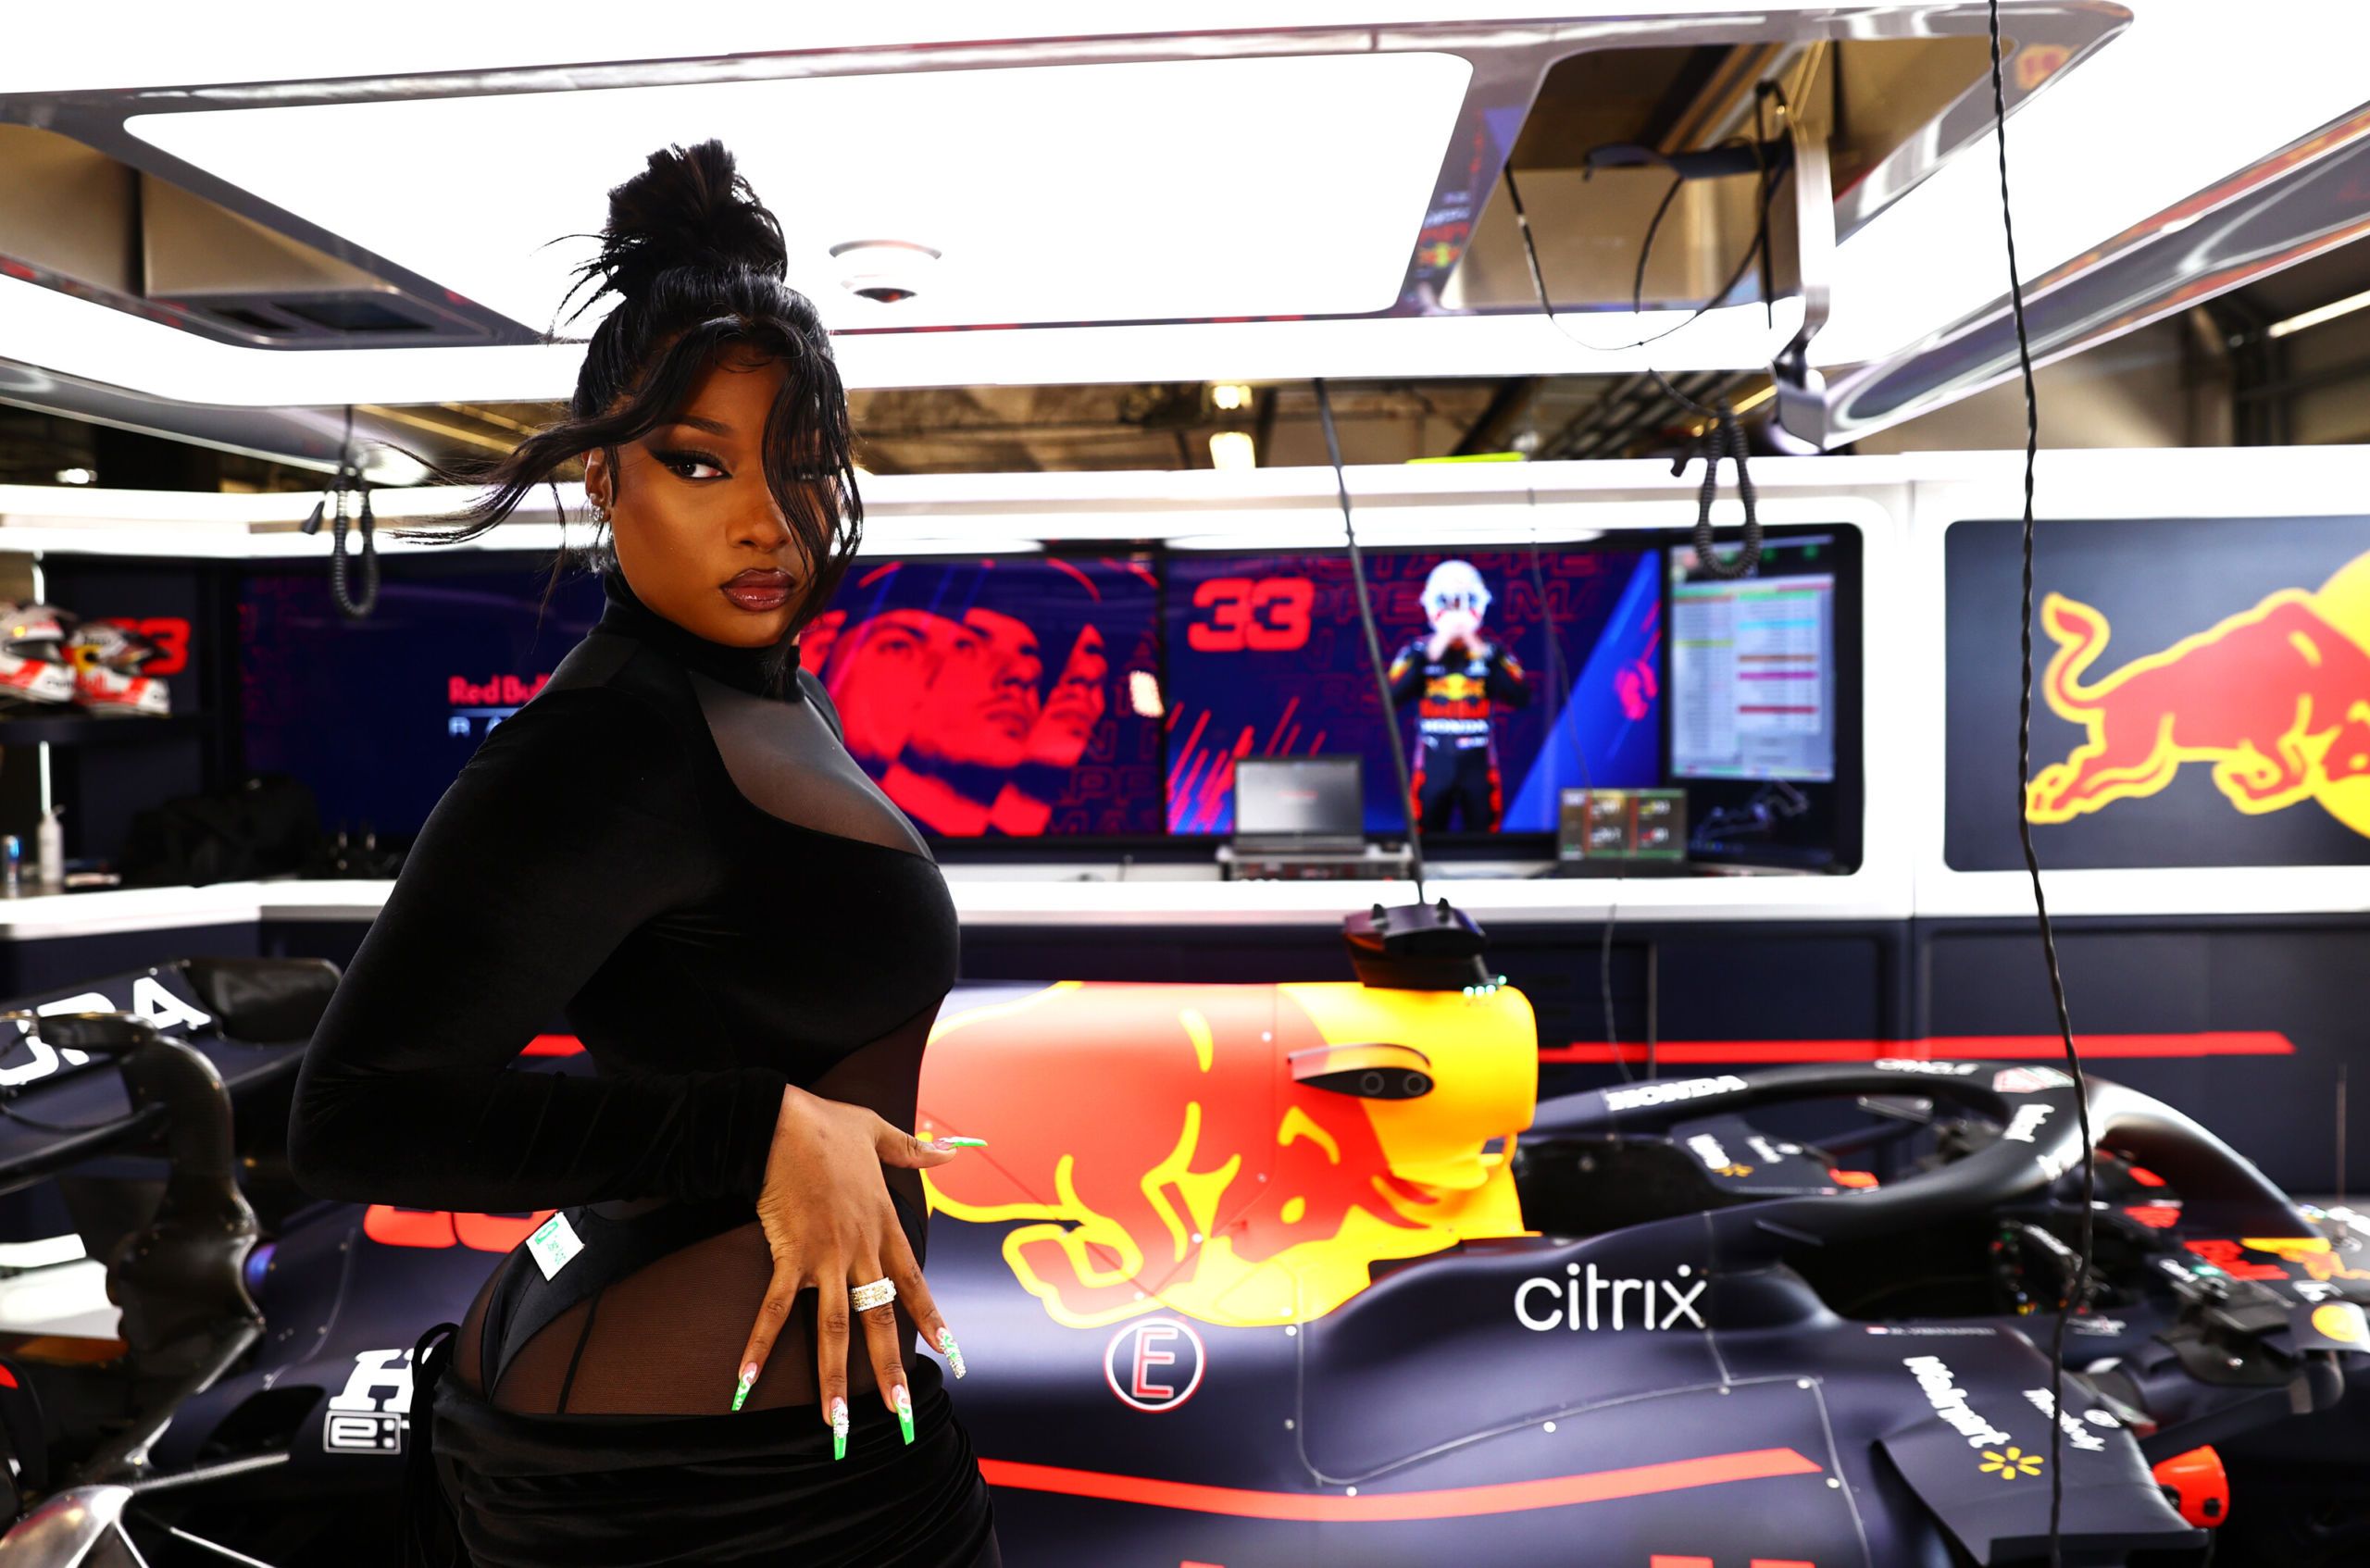 AUSTIN, TEXAS - OCTOBER 24: Megan Thee Stallion poses for a photo in the Red Bull Racing garage before the F1 Grand Prix of USA at Circuit of The Americas on October 24, 2021 in Austin, Texas. (Photo by Mark Thompson/Getty Images) // Getty Images / Red Bull Content Pool // SI202110240625 // Usage for editorial use only //